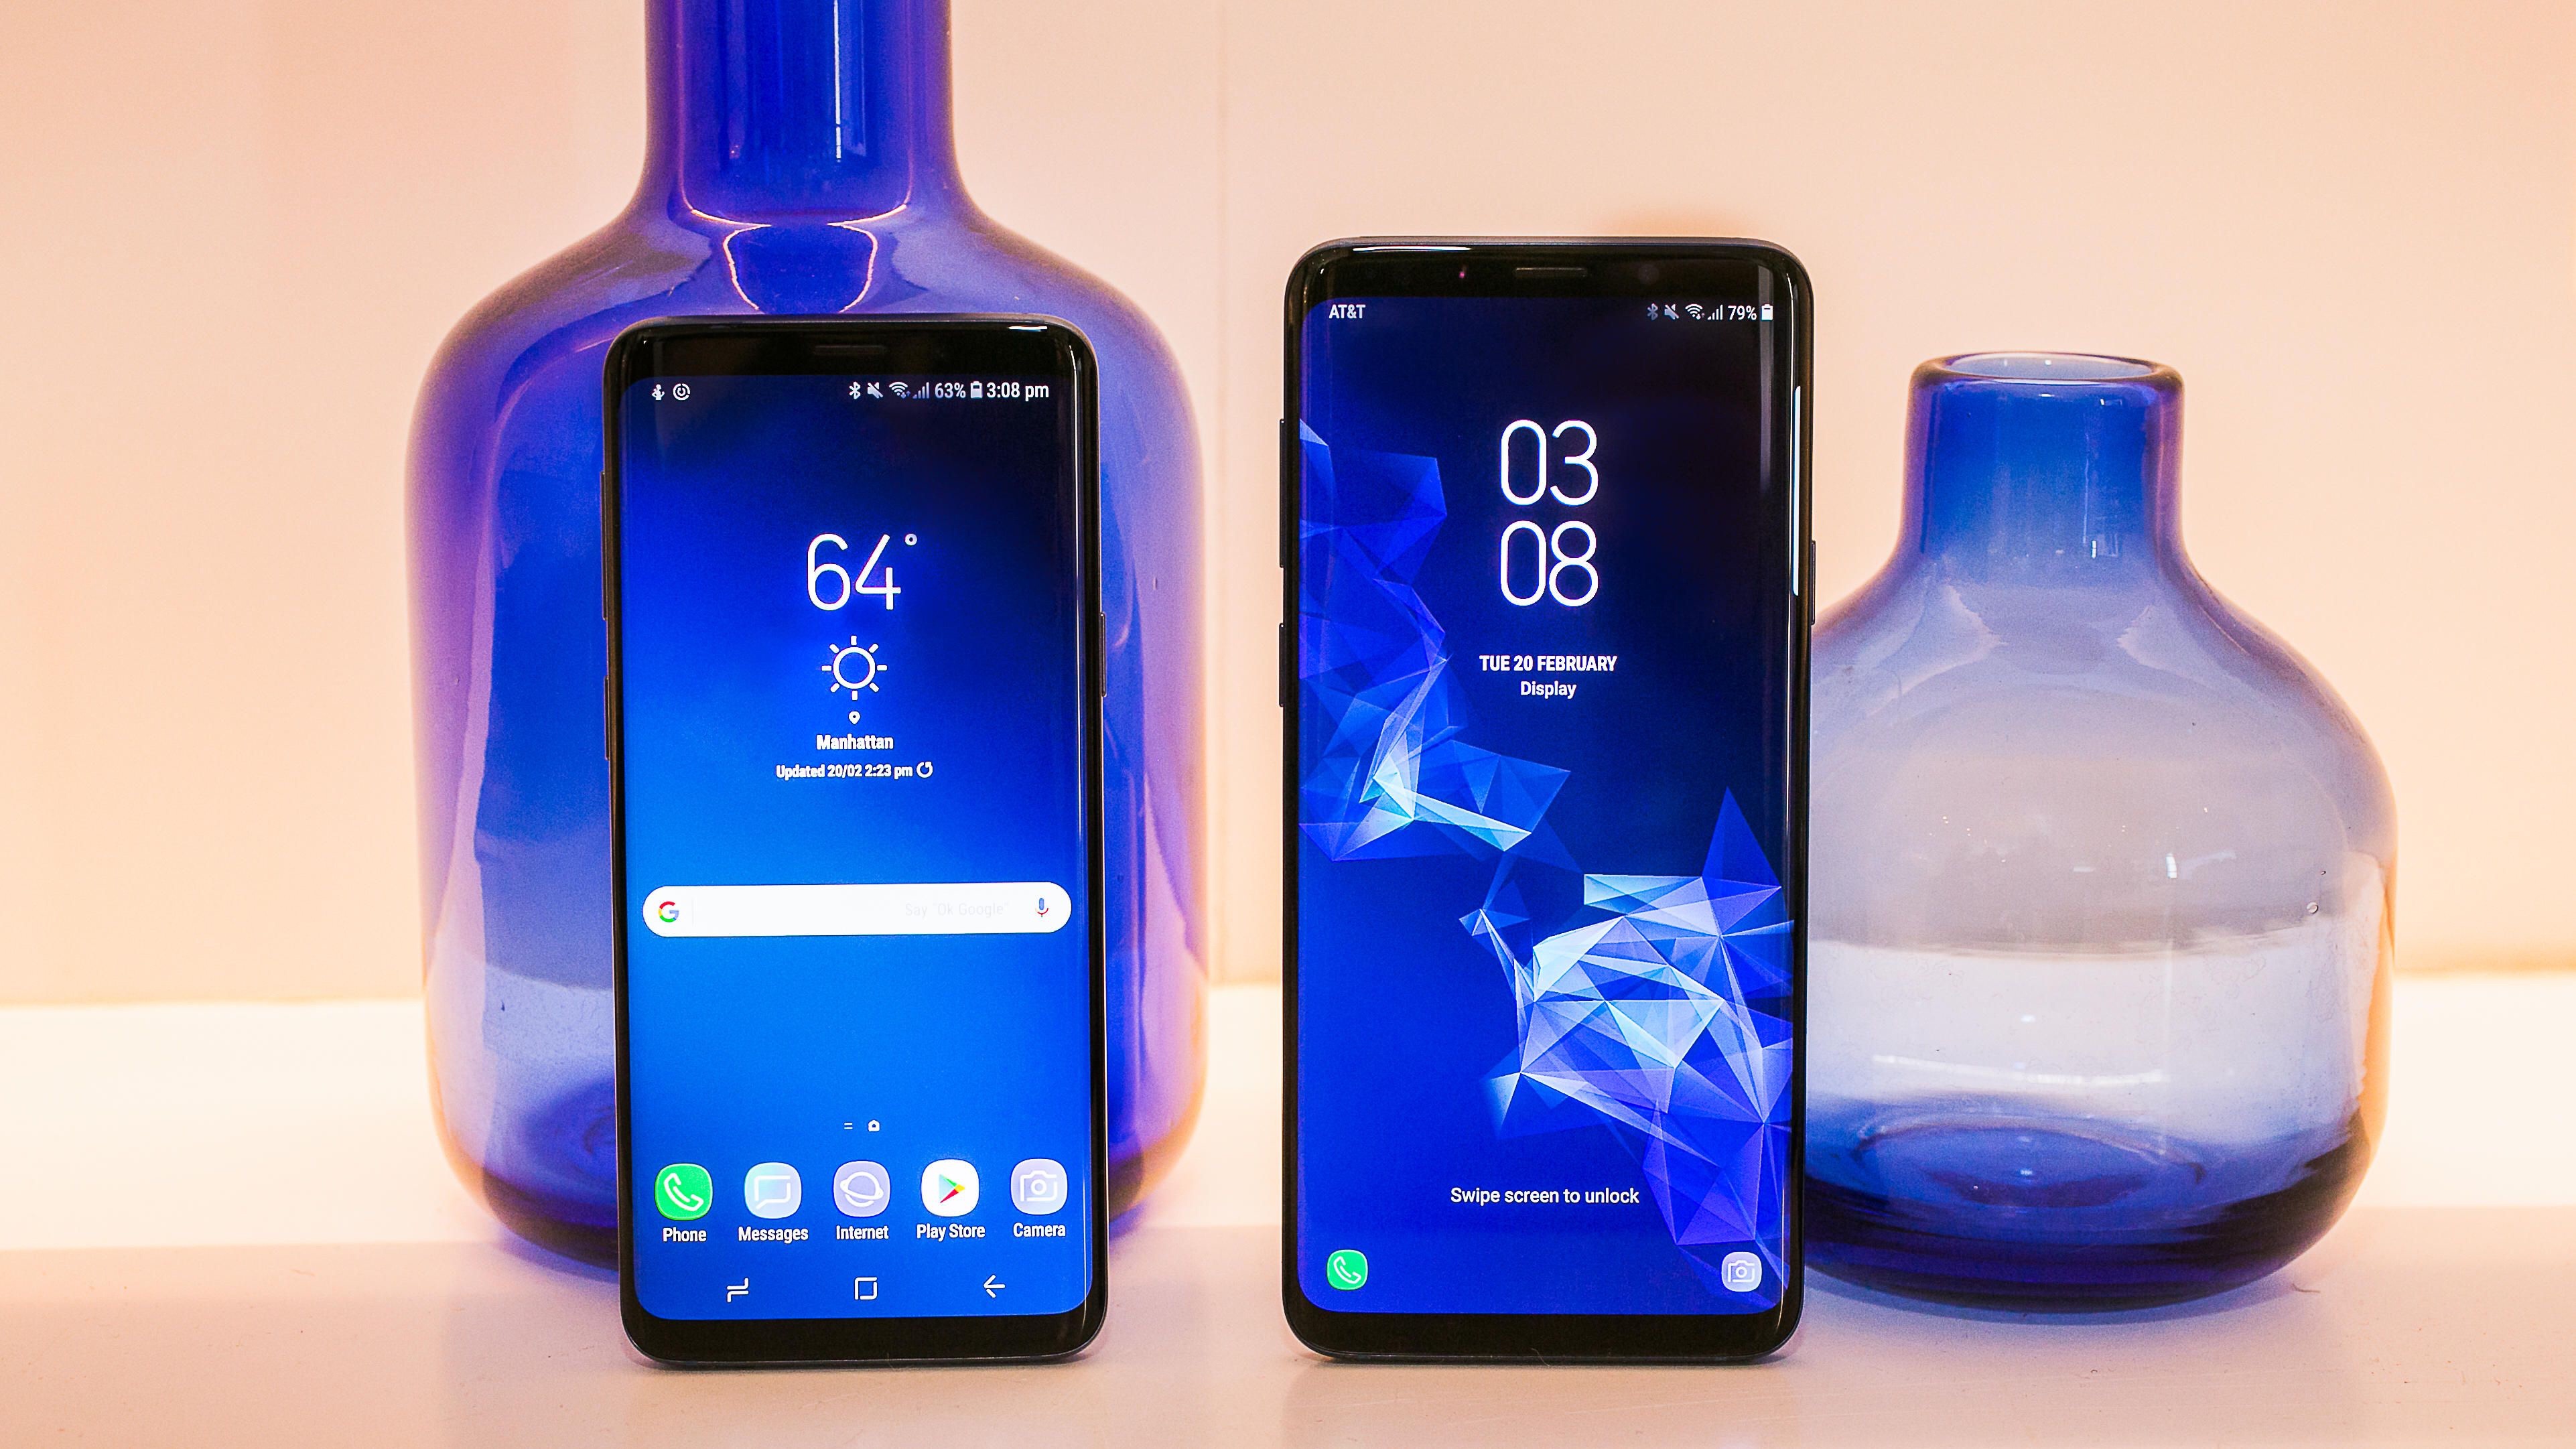 Samsung says it’s ‘looking into’ the Galaxy S9 toucscreen issues